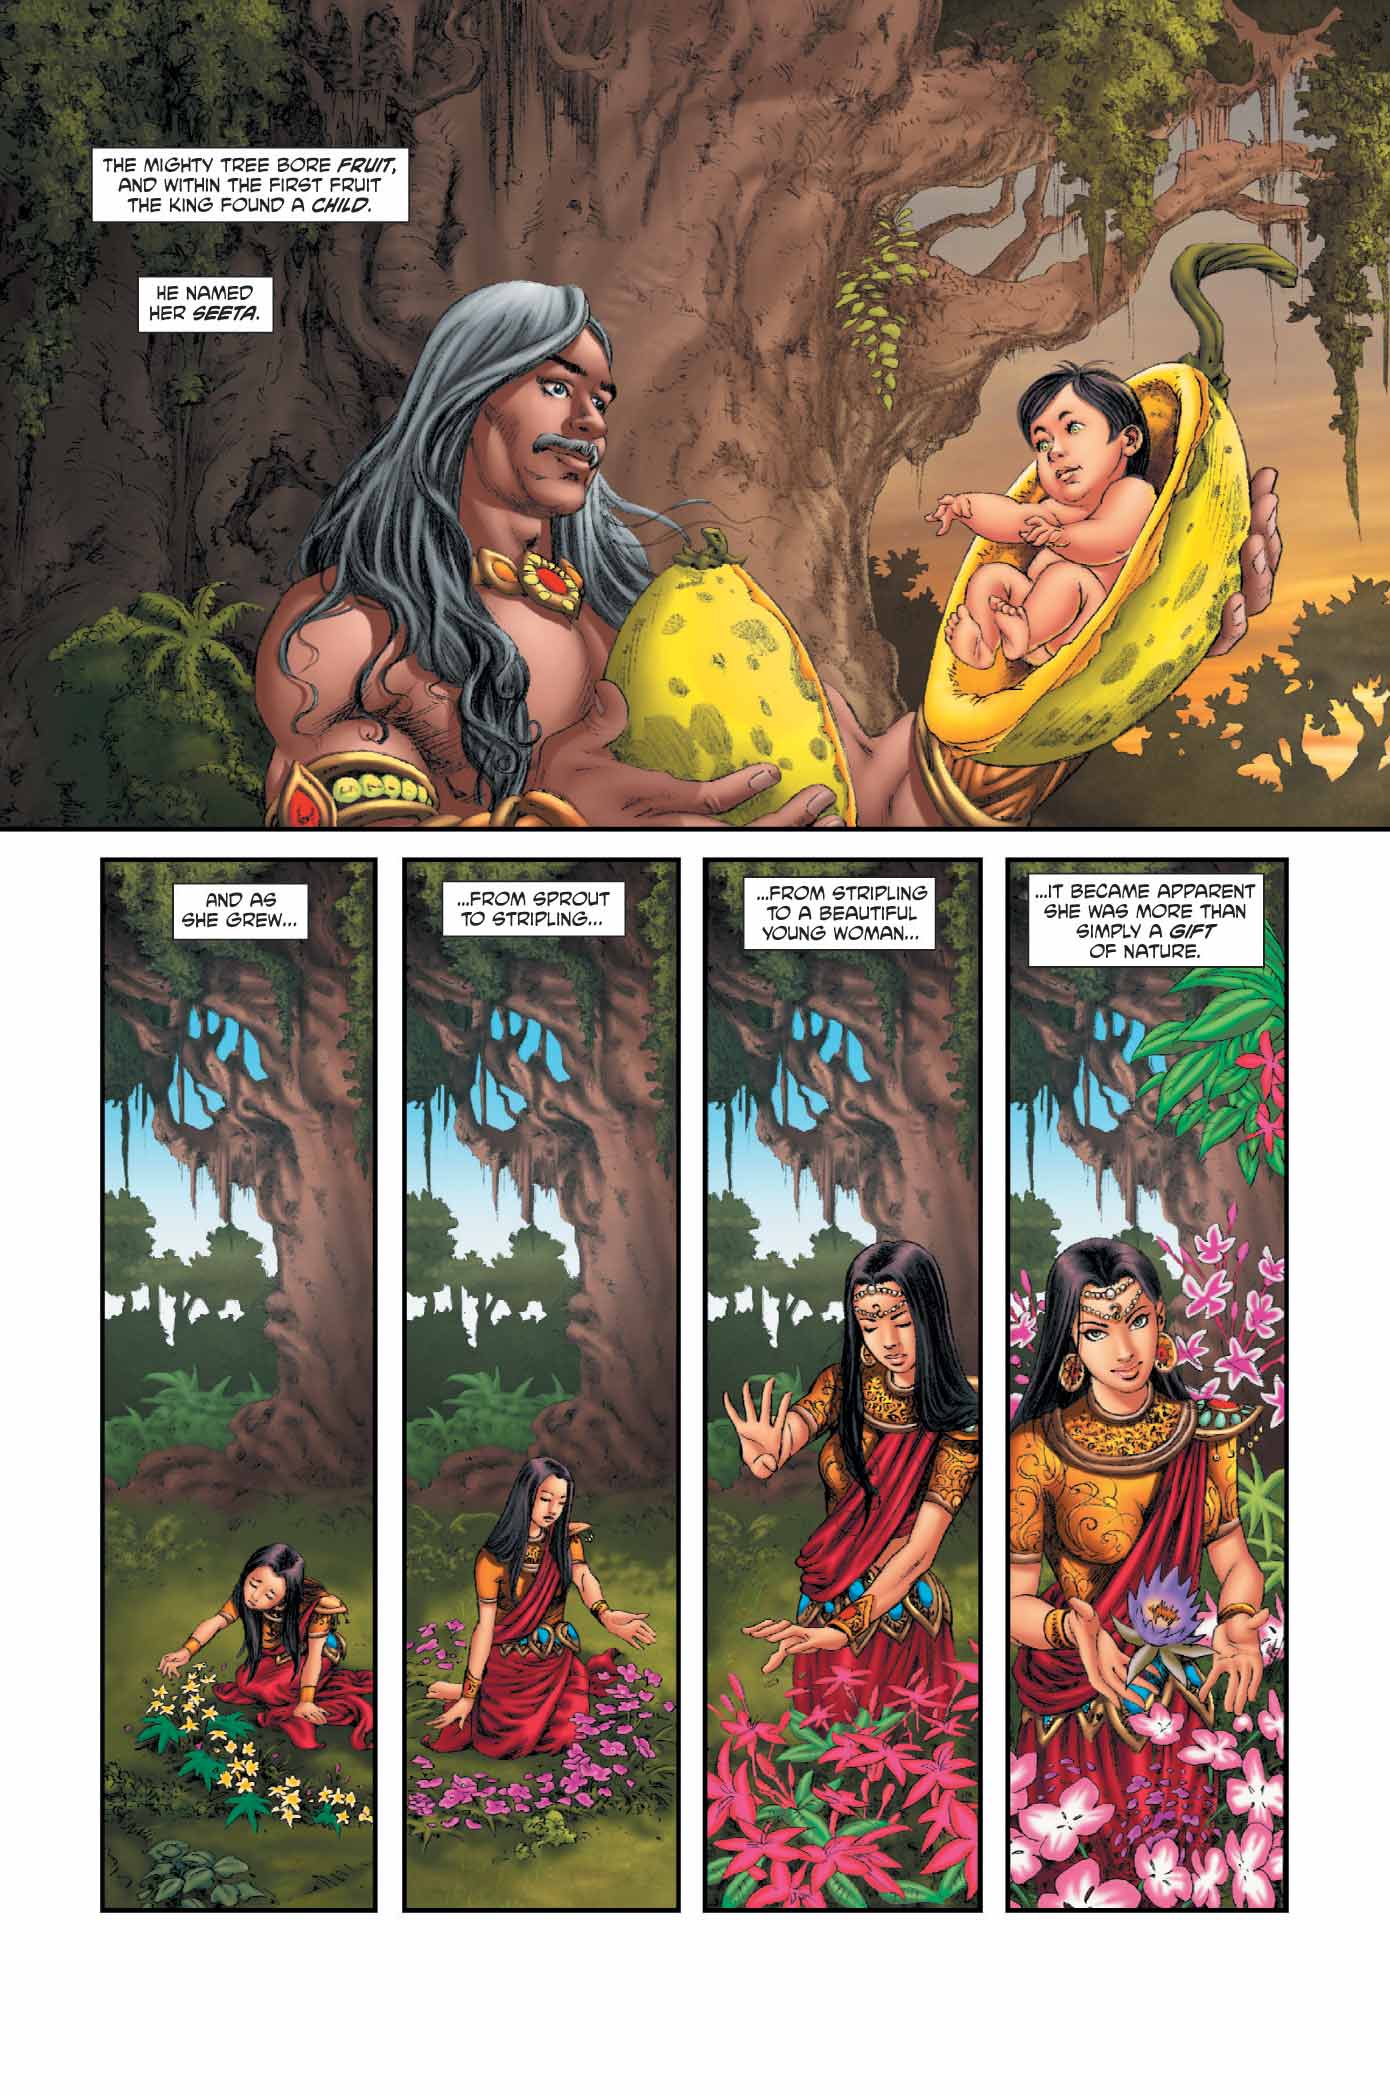 Ramayan 3392 A D Reloaded Issue 4 | Read Ramayan 3392 A D Reloaded Issue 4  comic online in high quality. Read Full Comic online for free - Read comics  online in high quality .|viewcomiconline.com